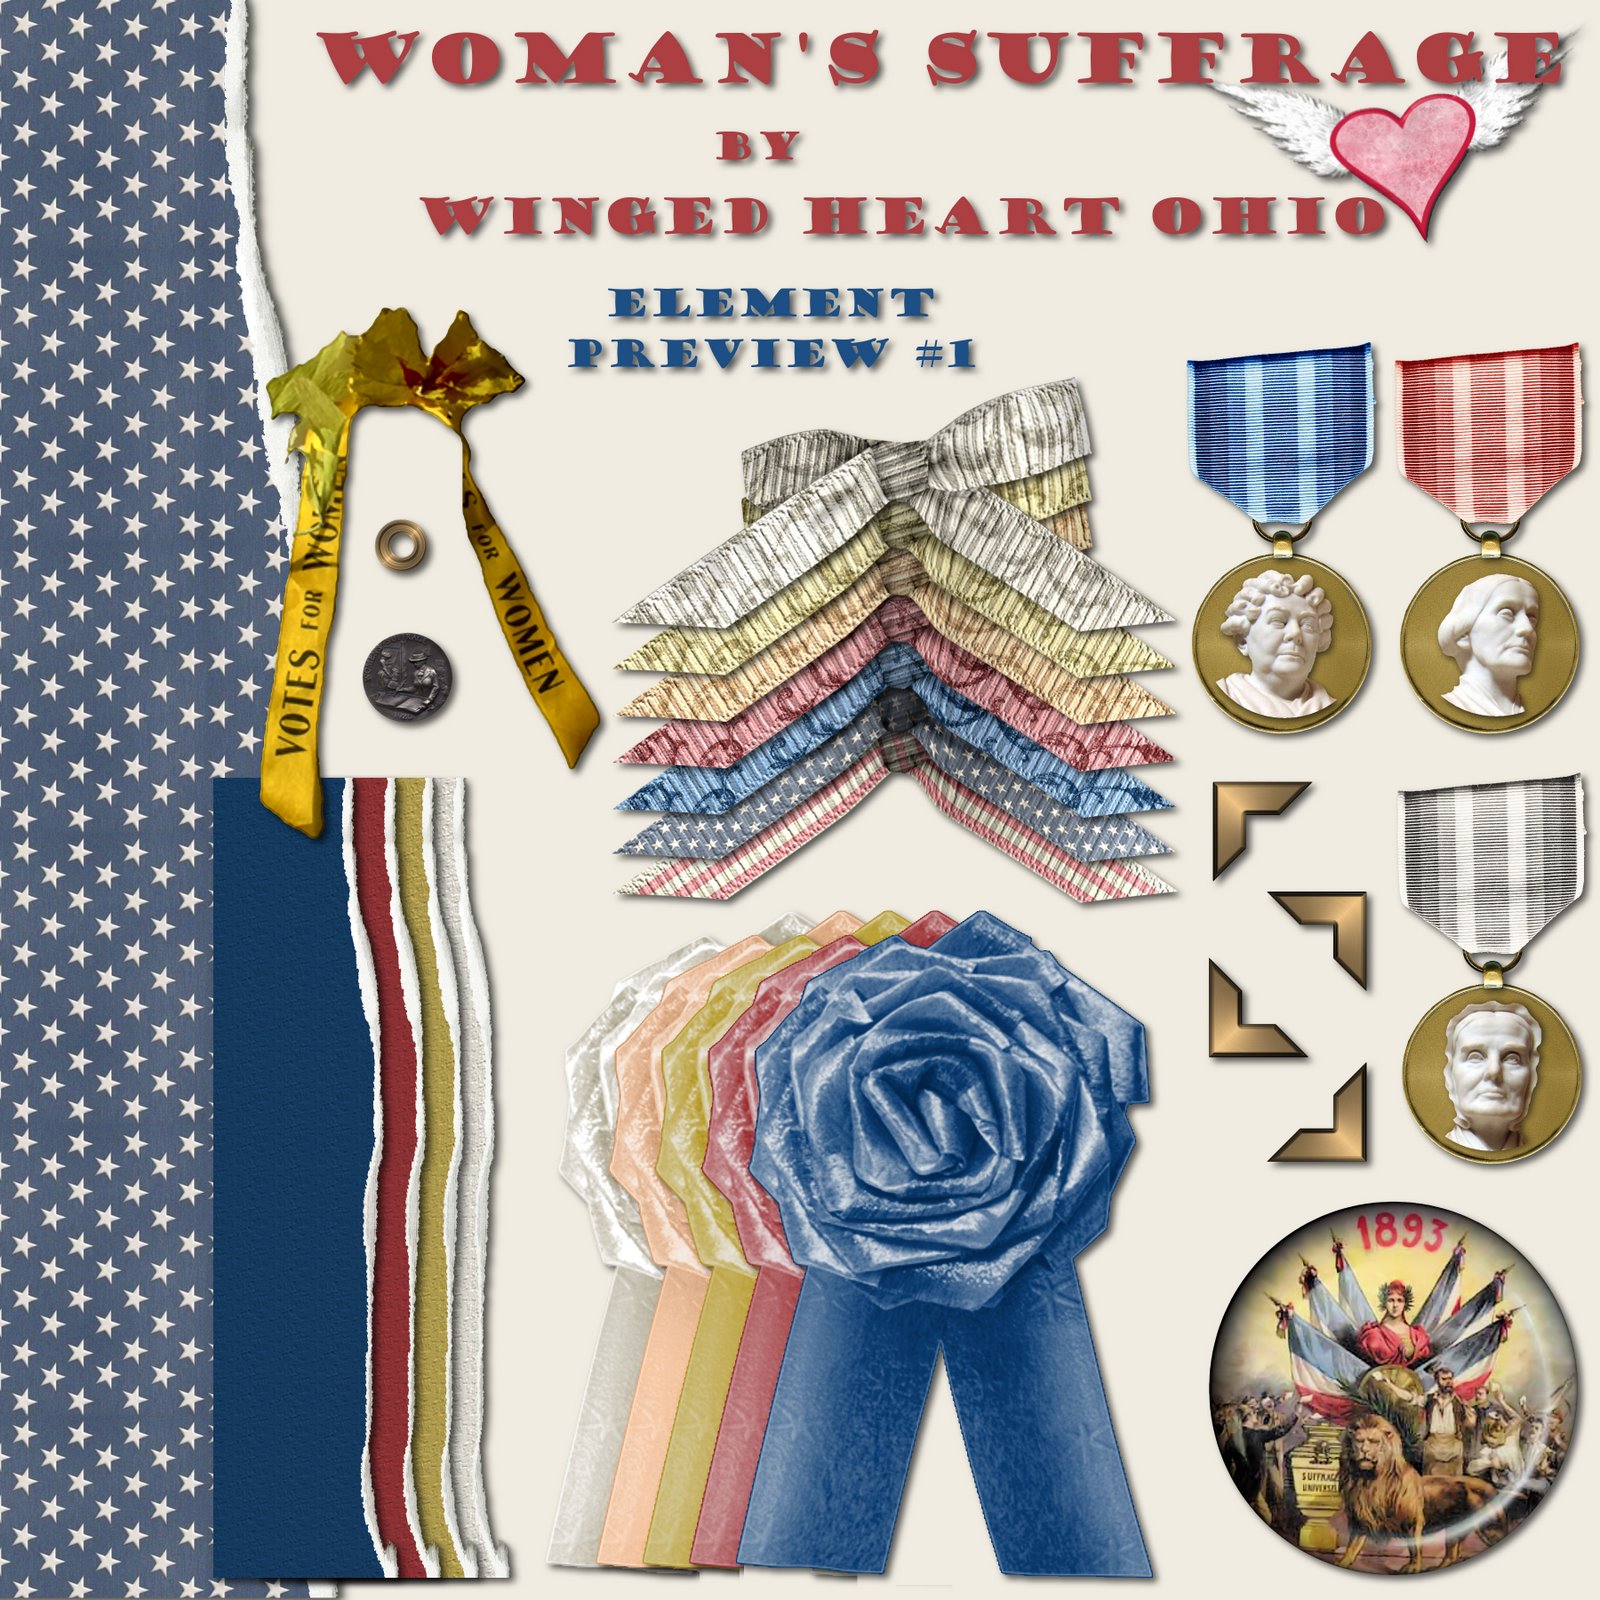 [WH_Suffrage_Preview2.jpg]